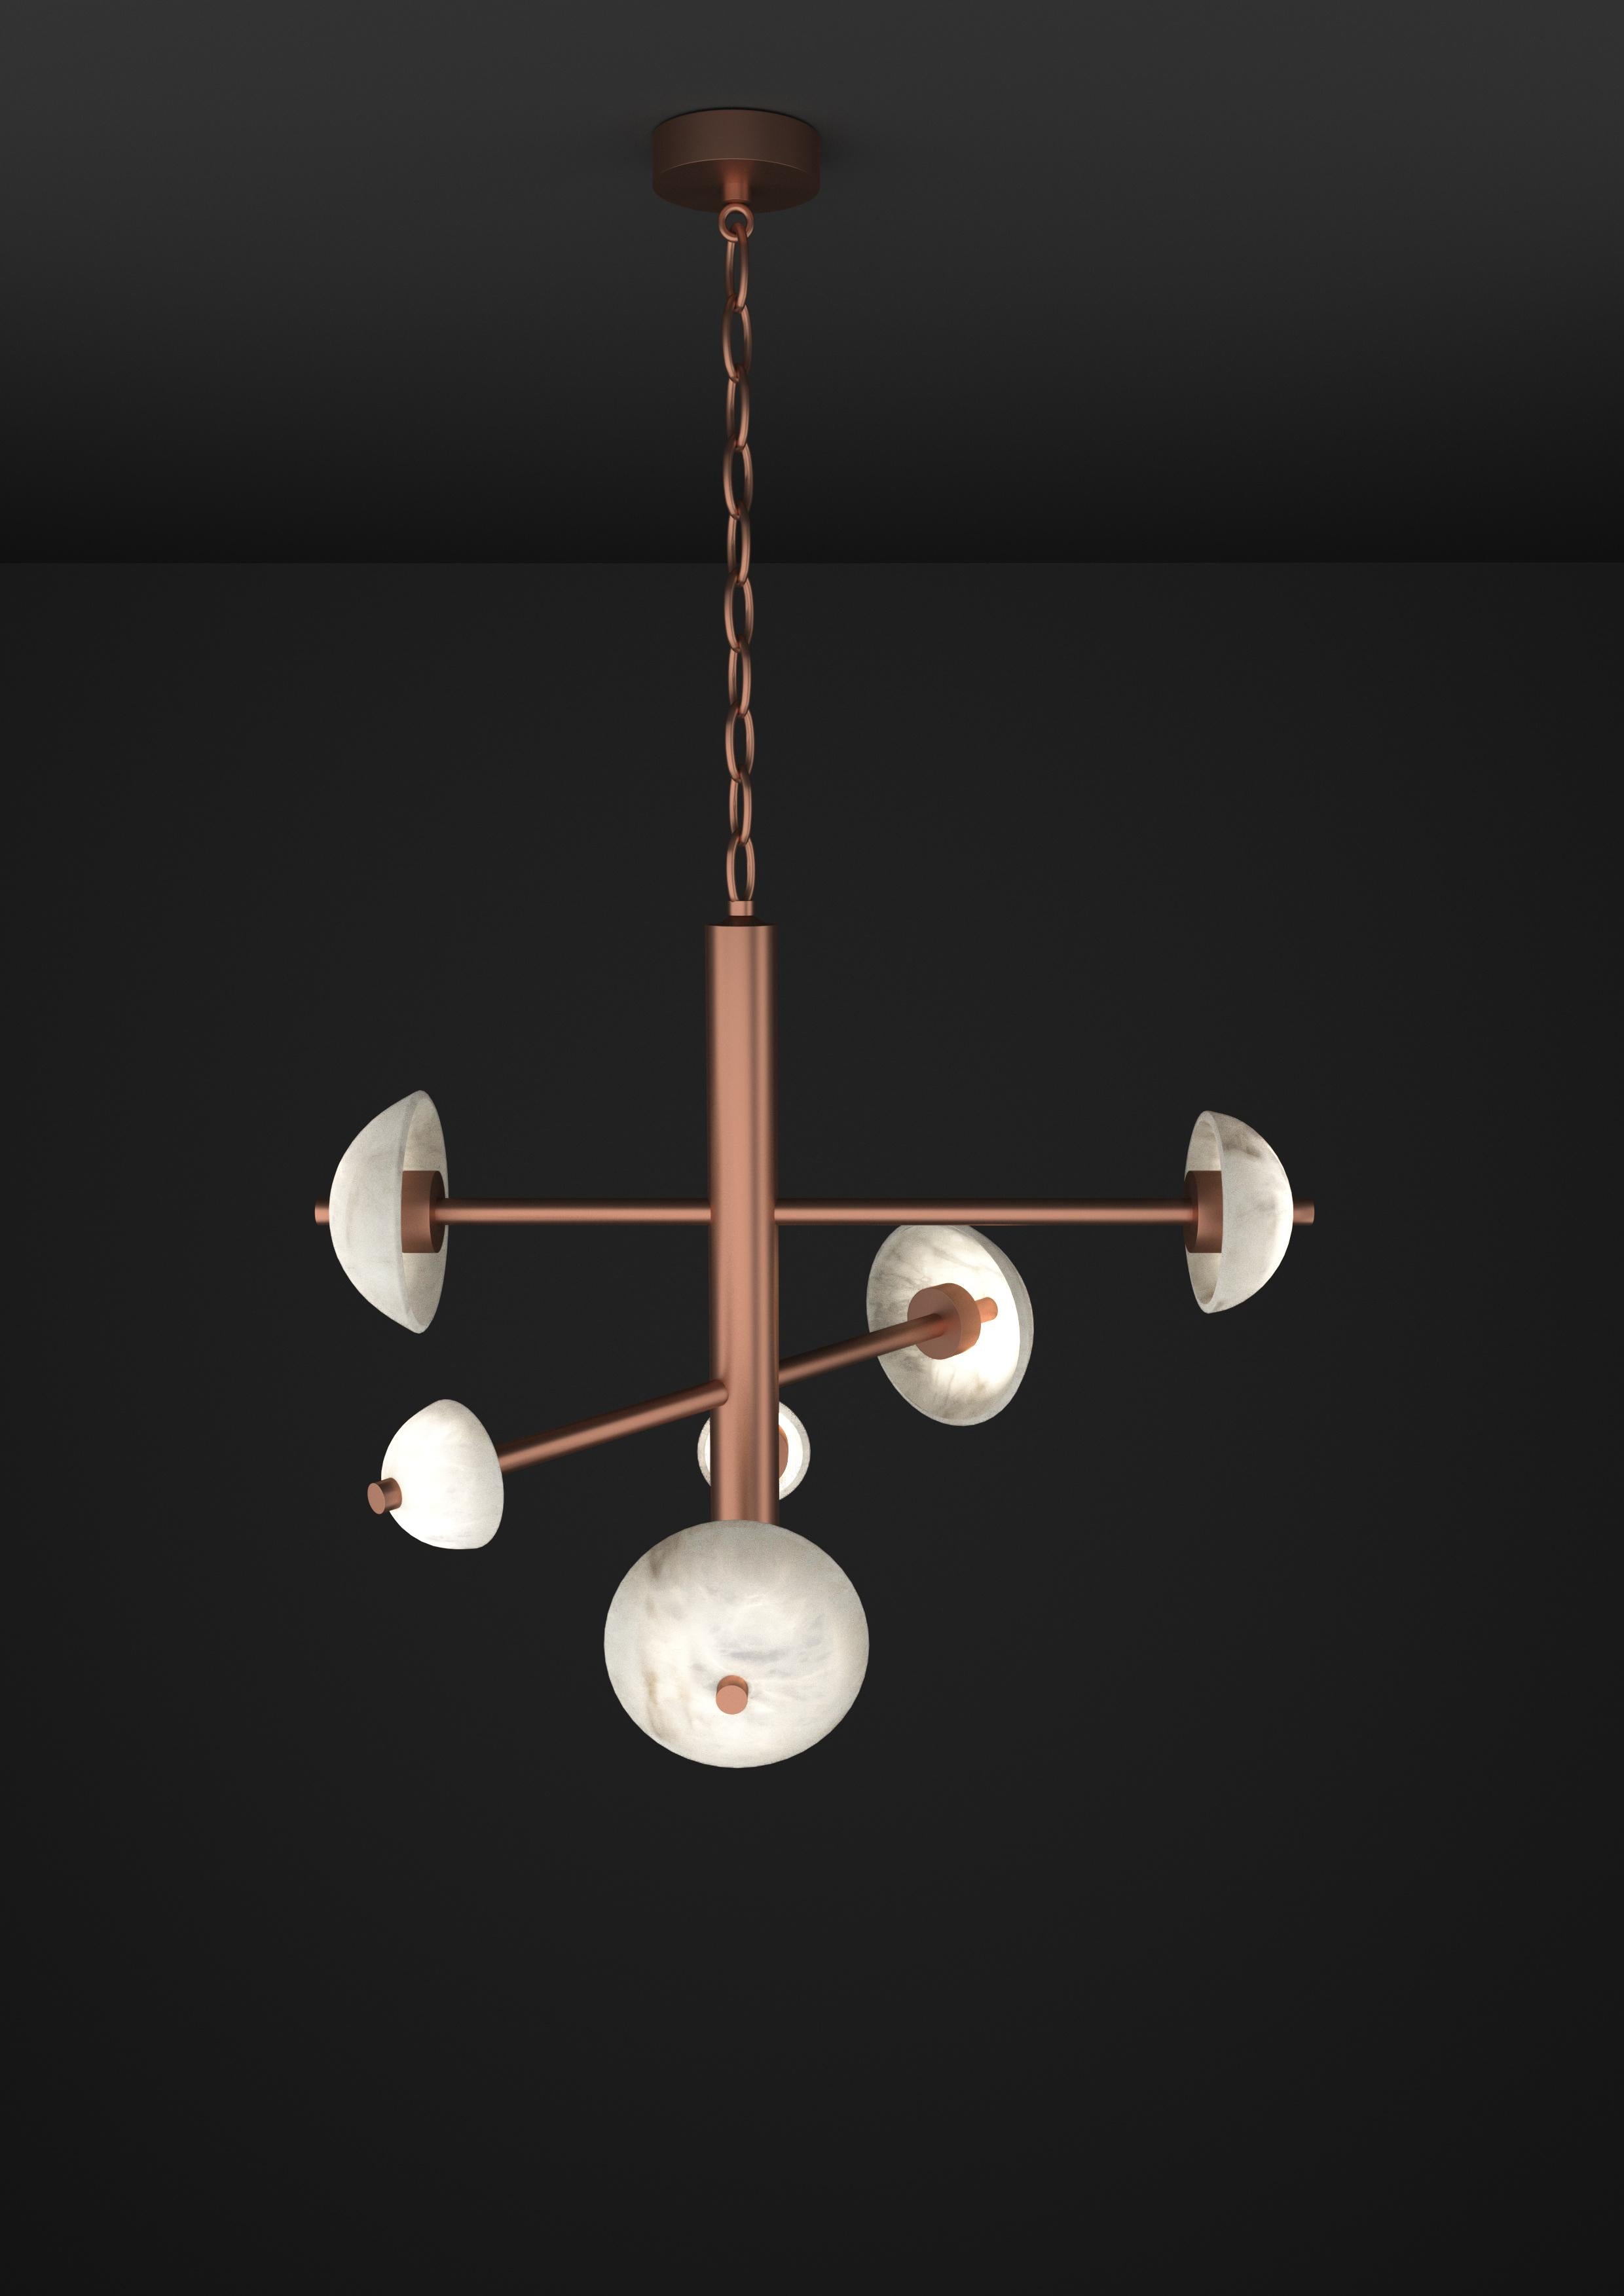 Apollo Copper Pendant Lamp by Alabastro Italiano
Dimensions: D 70,5 x W 54 x H 64 cm.
Materials: White alabaster and copper.

Available in different finishes: Shiny Silver, Bronze, Brushed Brass, Ruggine of Florence, Brushed Burnished, Shiny Gold,